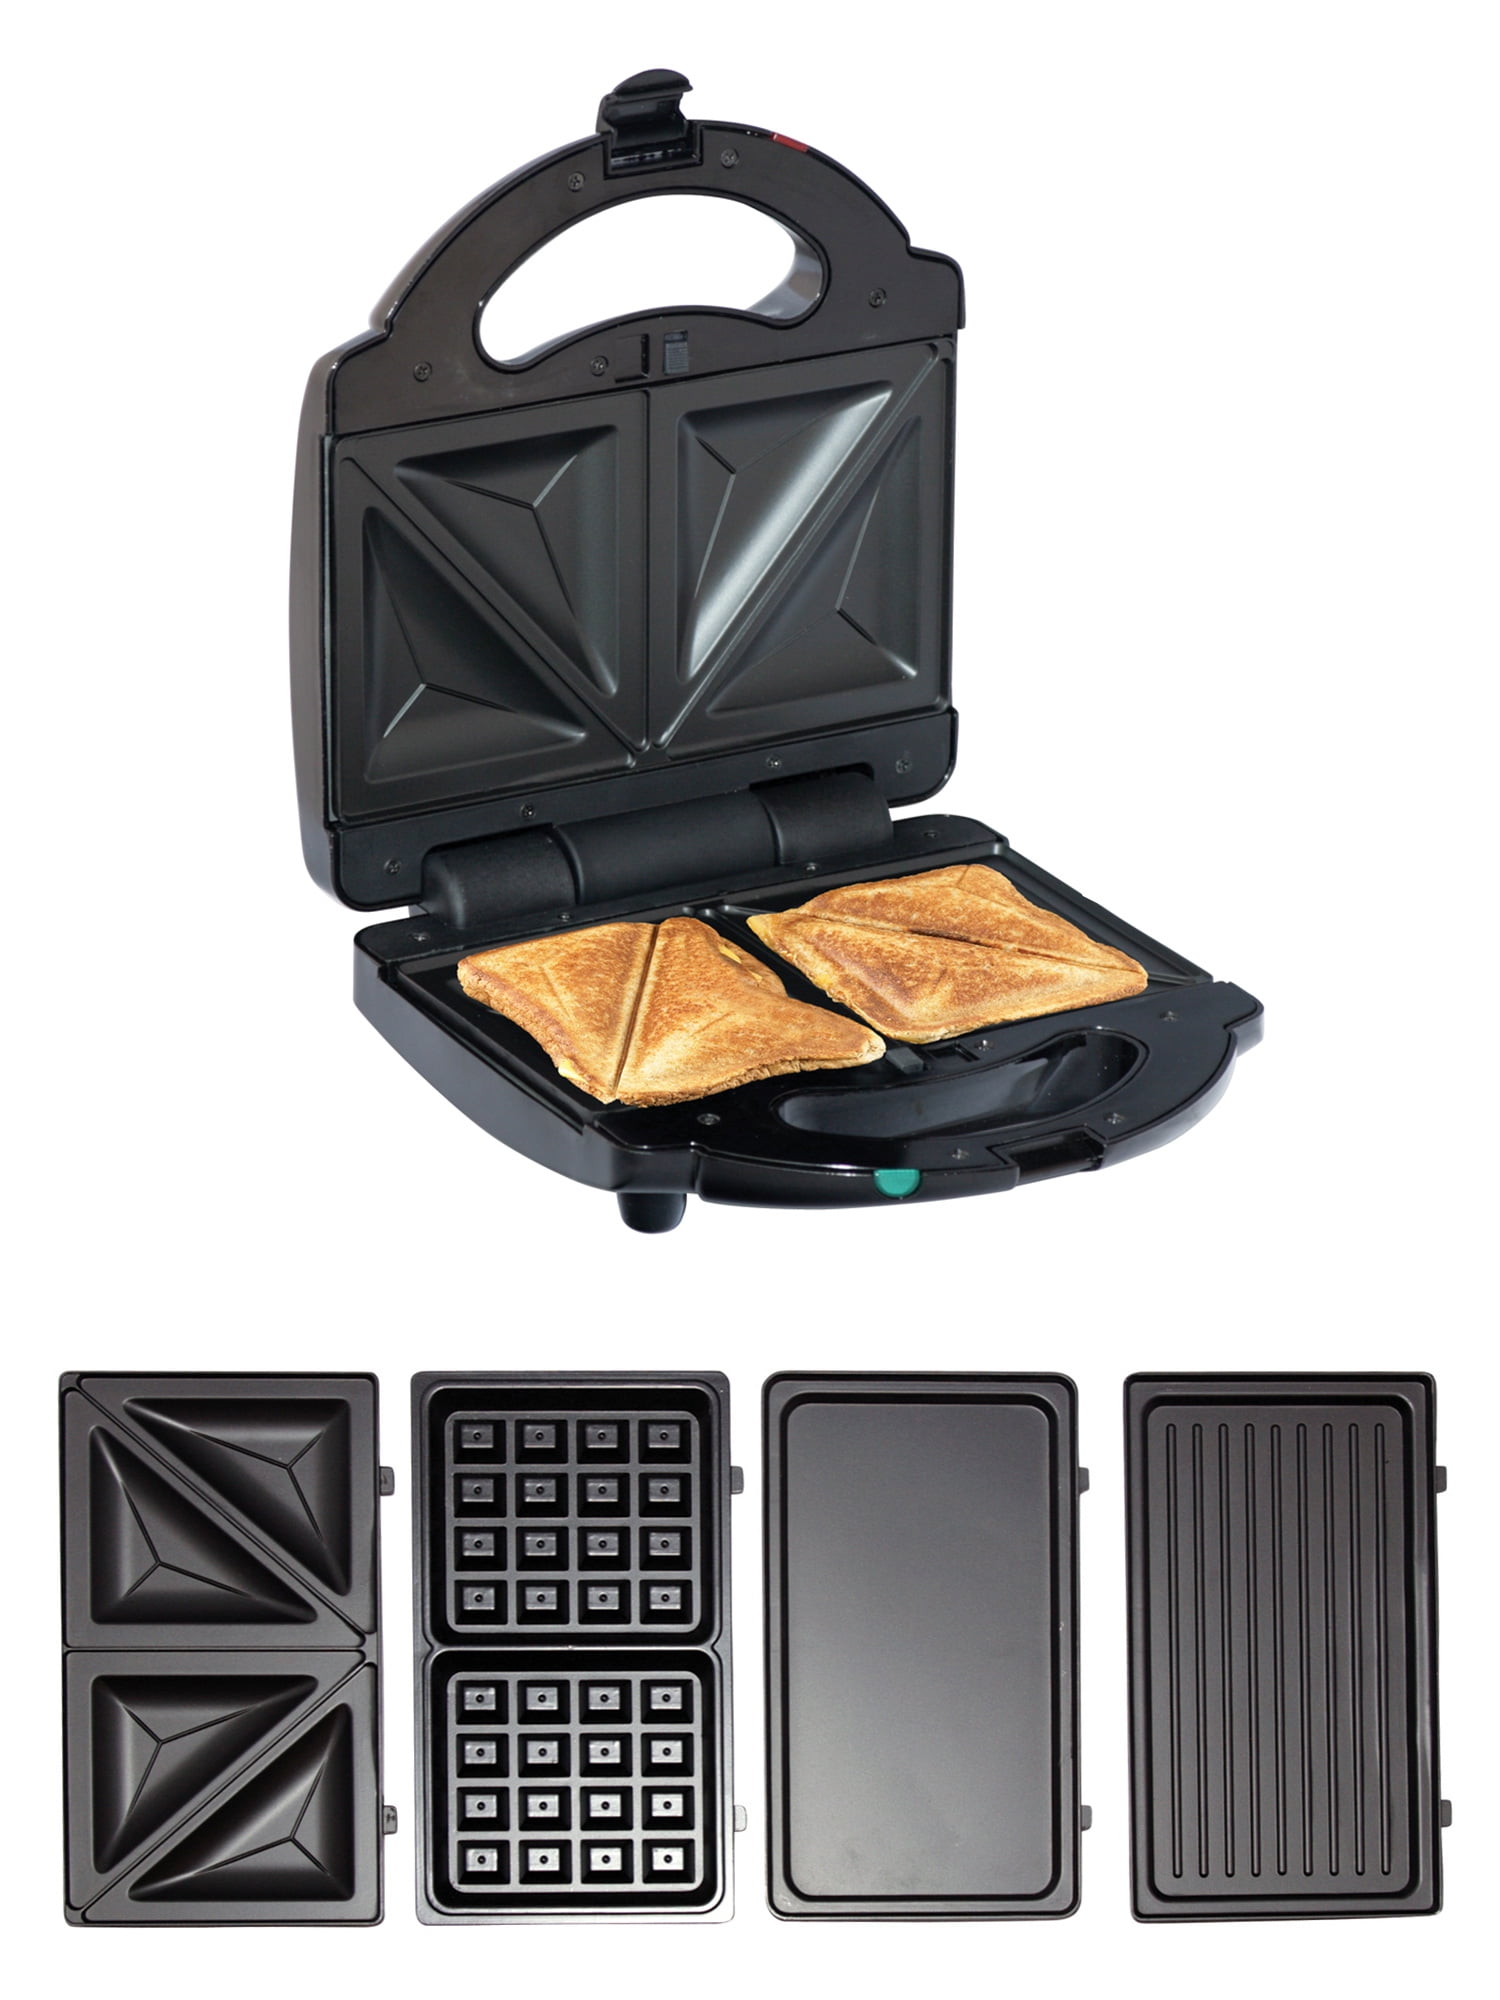 Quick Breakfast Multifunctional Iron Machine Removable Nonstick Plates Premium Baking Pan Steak Panini Gift Sandwich Electric Waffle Maker 5 in 1 Donuts for Waffles 